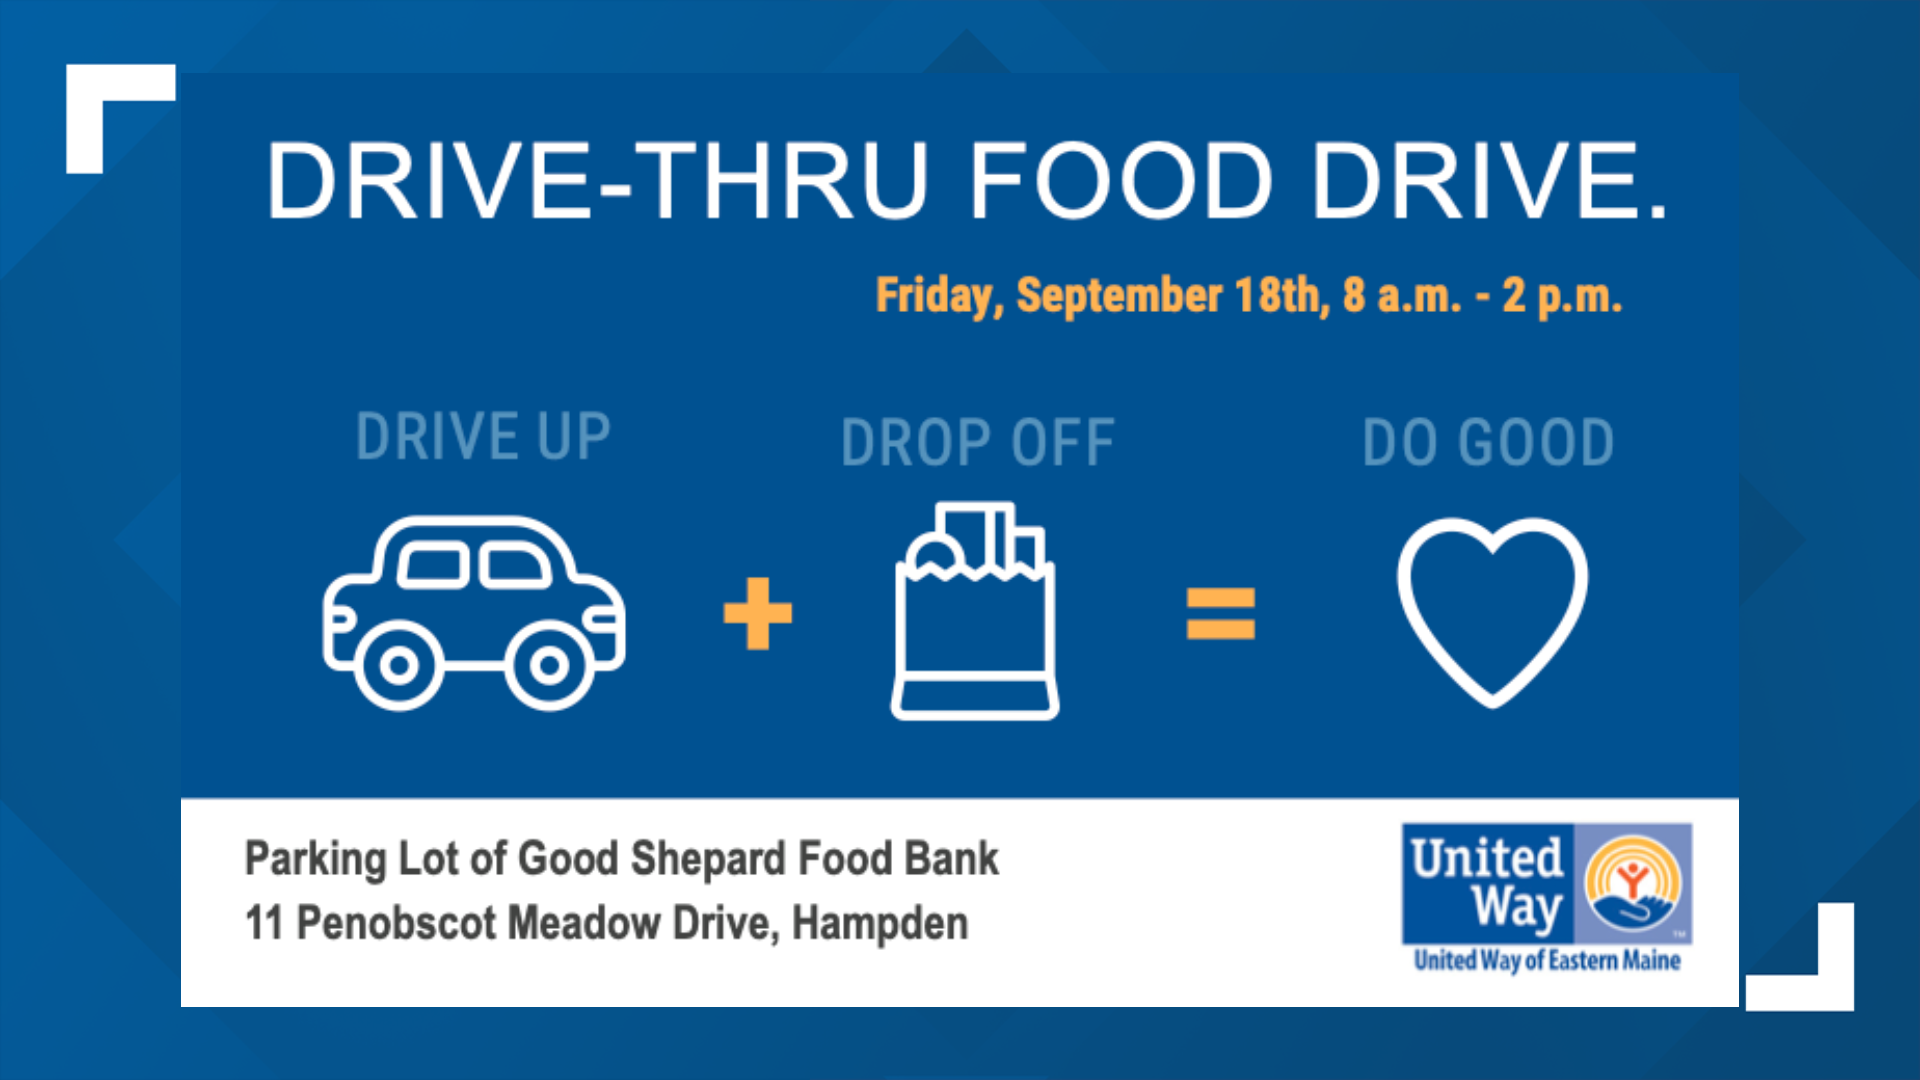 The United Way of Eastern Maine is holding its drive-thru food drive on September 18 from 8 a.m. to 2 p.m. at the Good Shepherd Food Bank in Hampden.